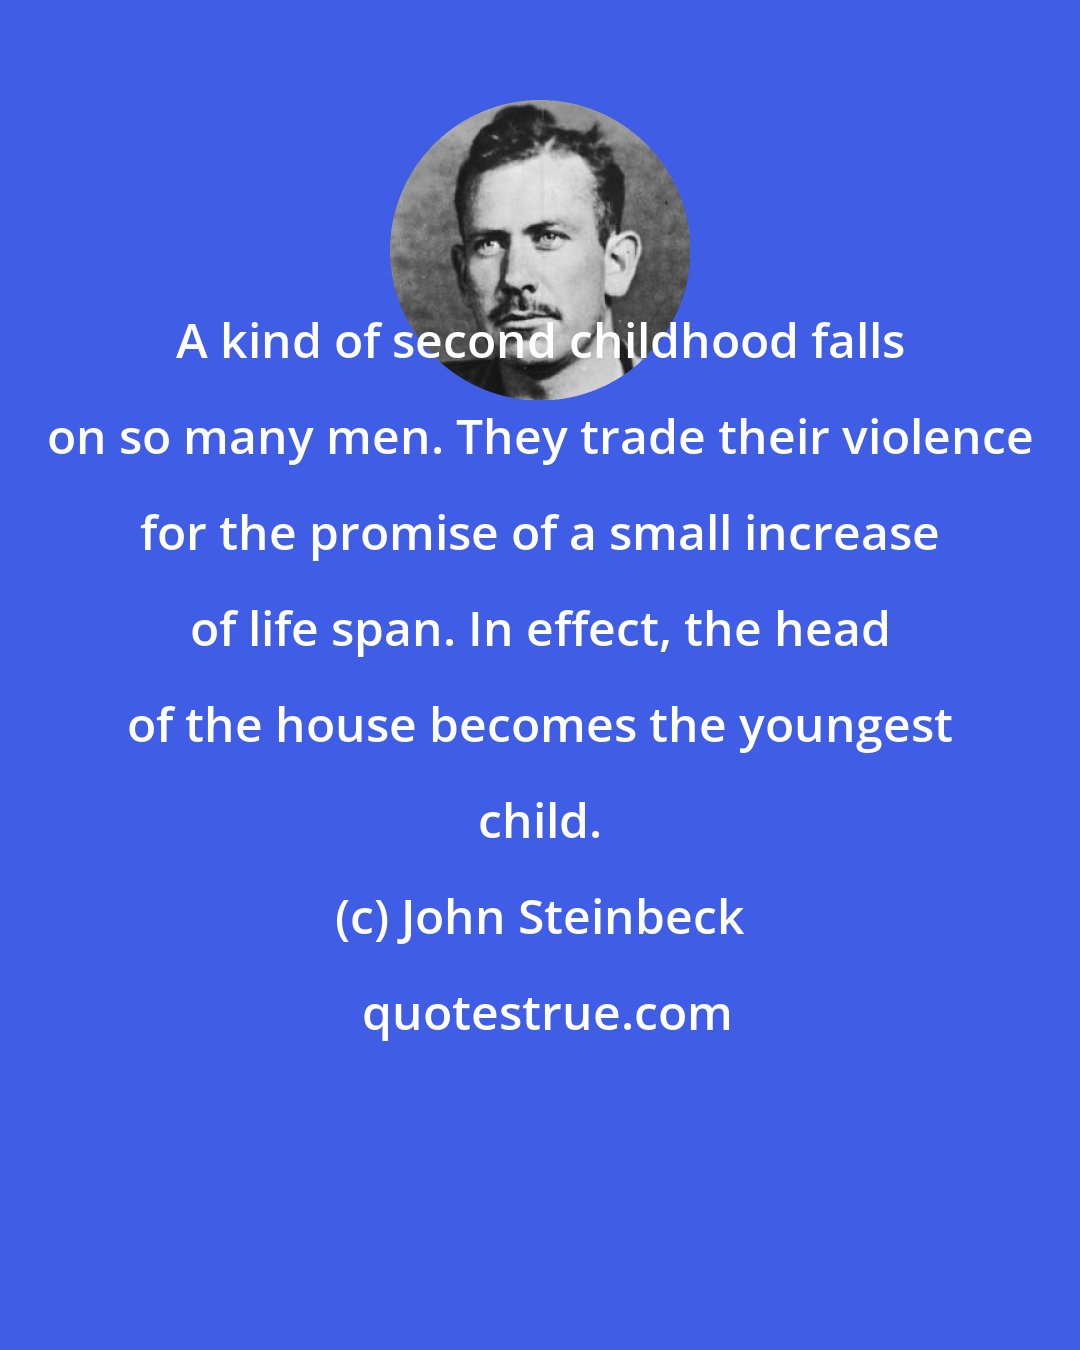 John Steinbeck: A kind of second childhood falls on so many men. They trade their violence for the promise of a small increase of life span. In effect, the head of the house becomes the youngest child.